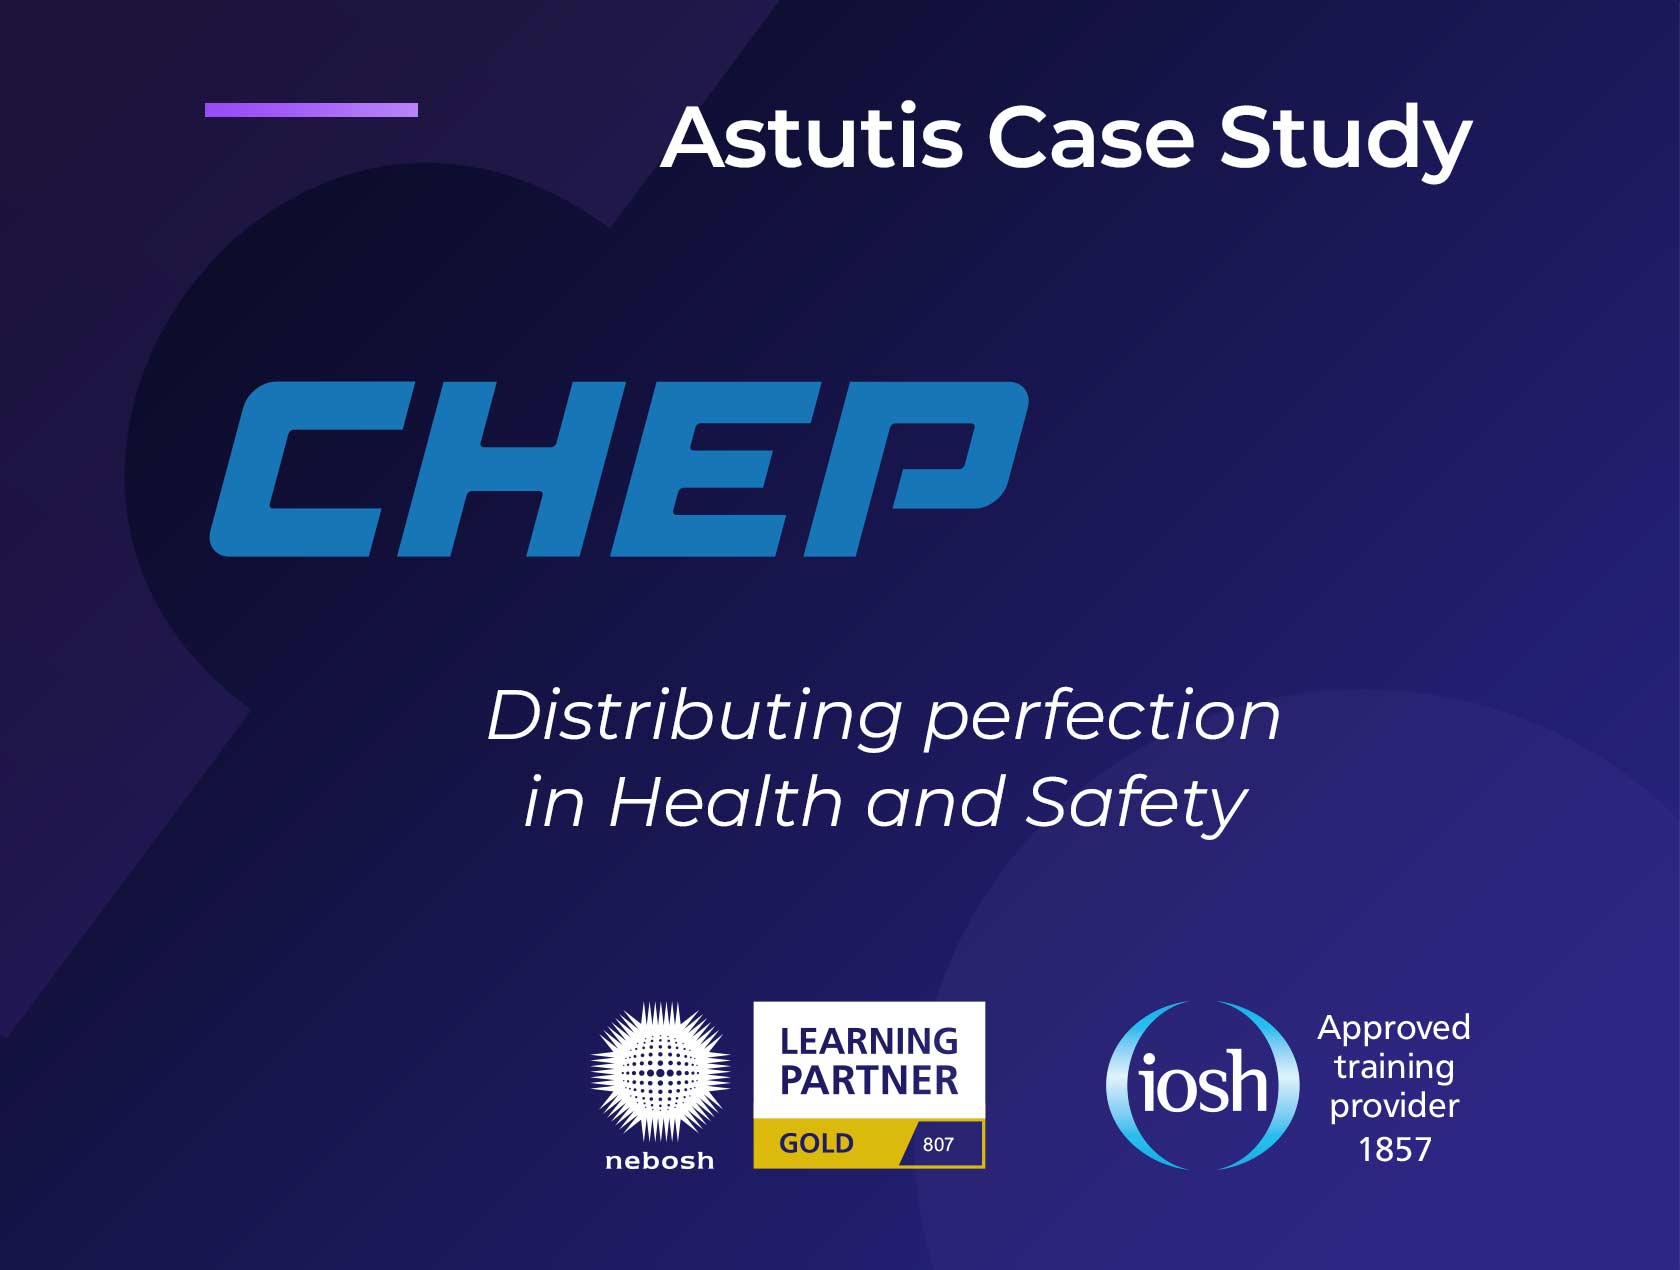 CHEP: Distributing perfection in Health and Safety